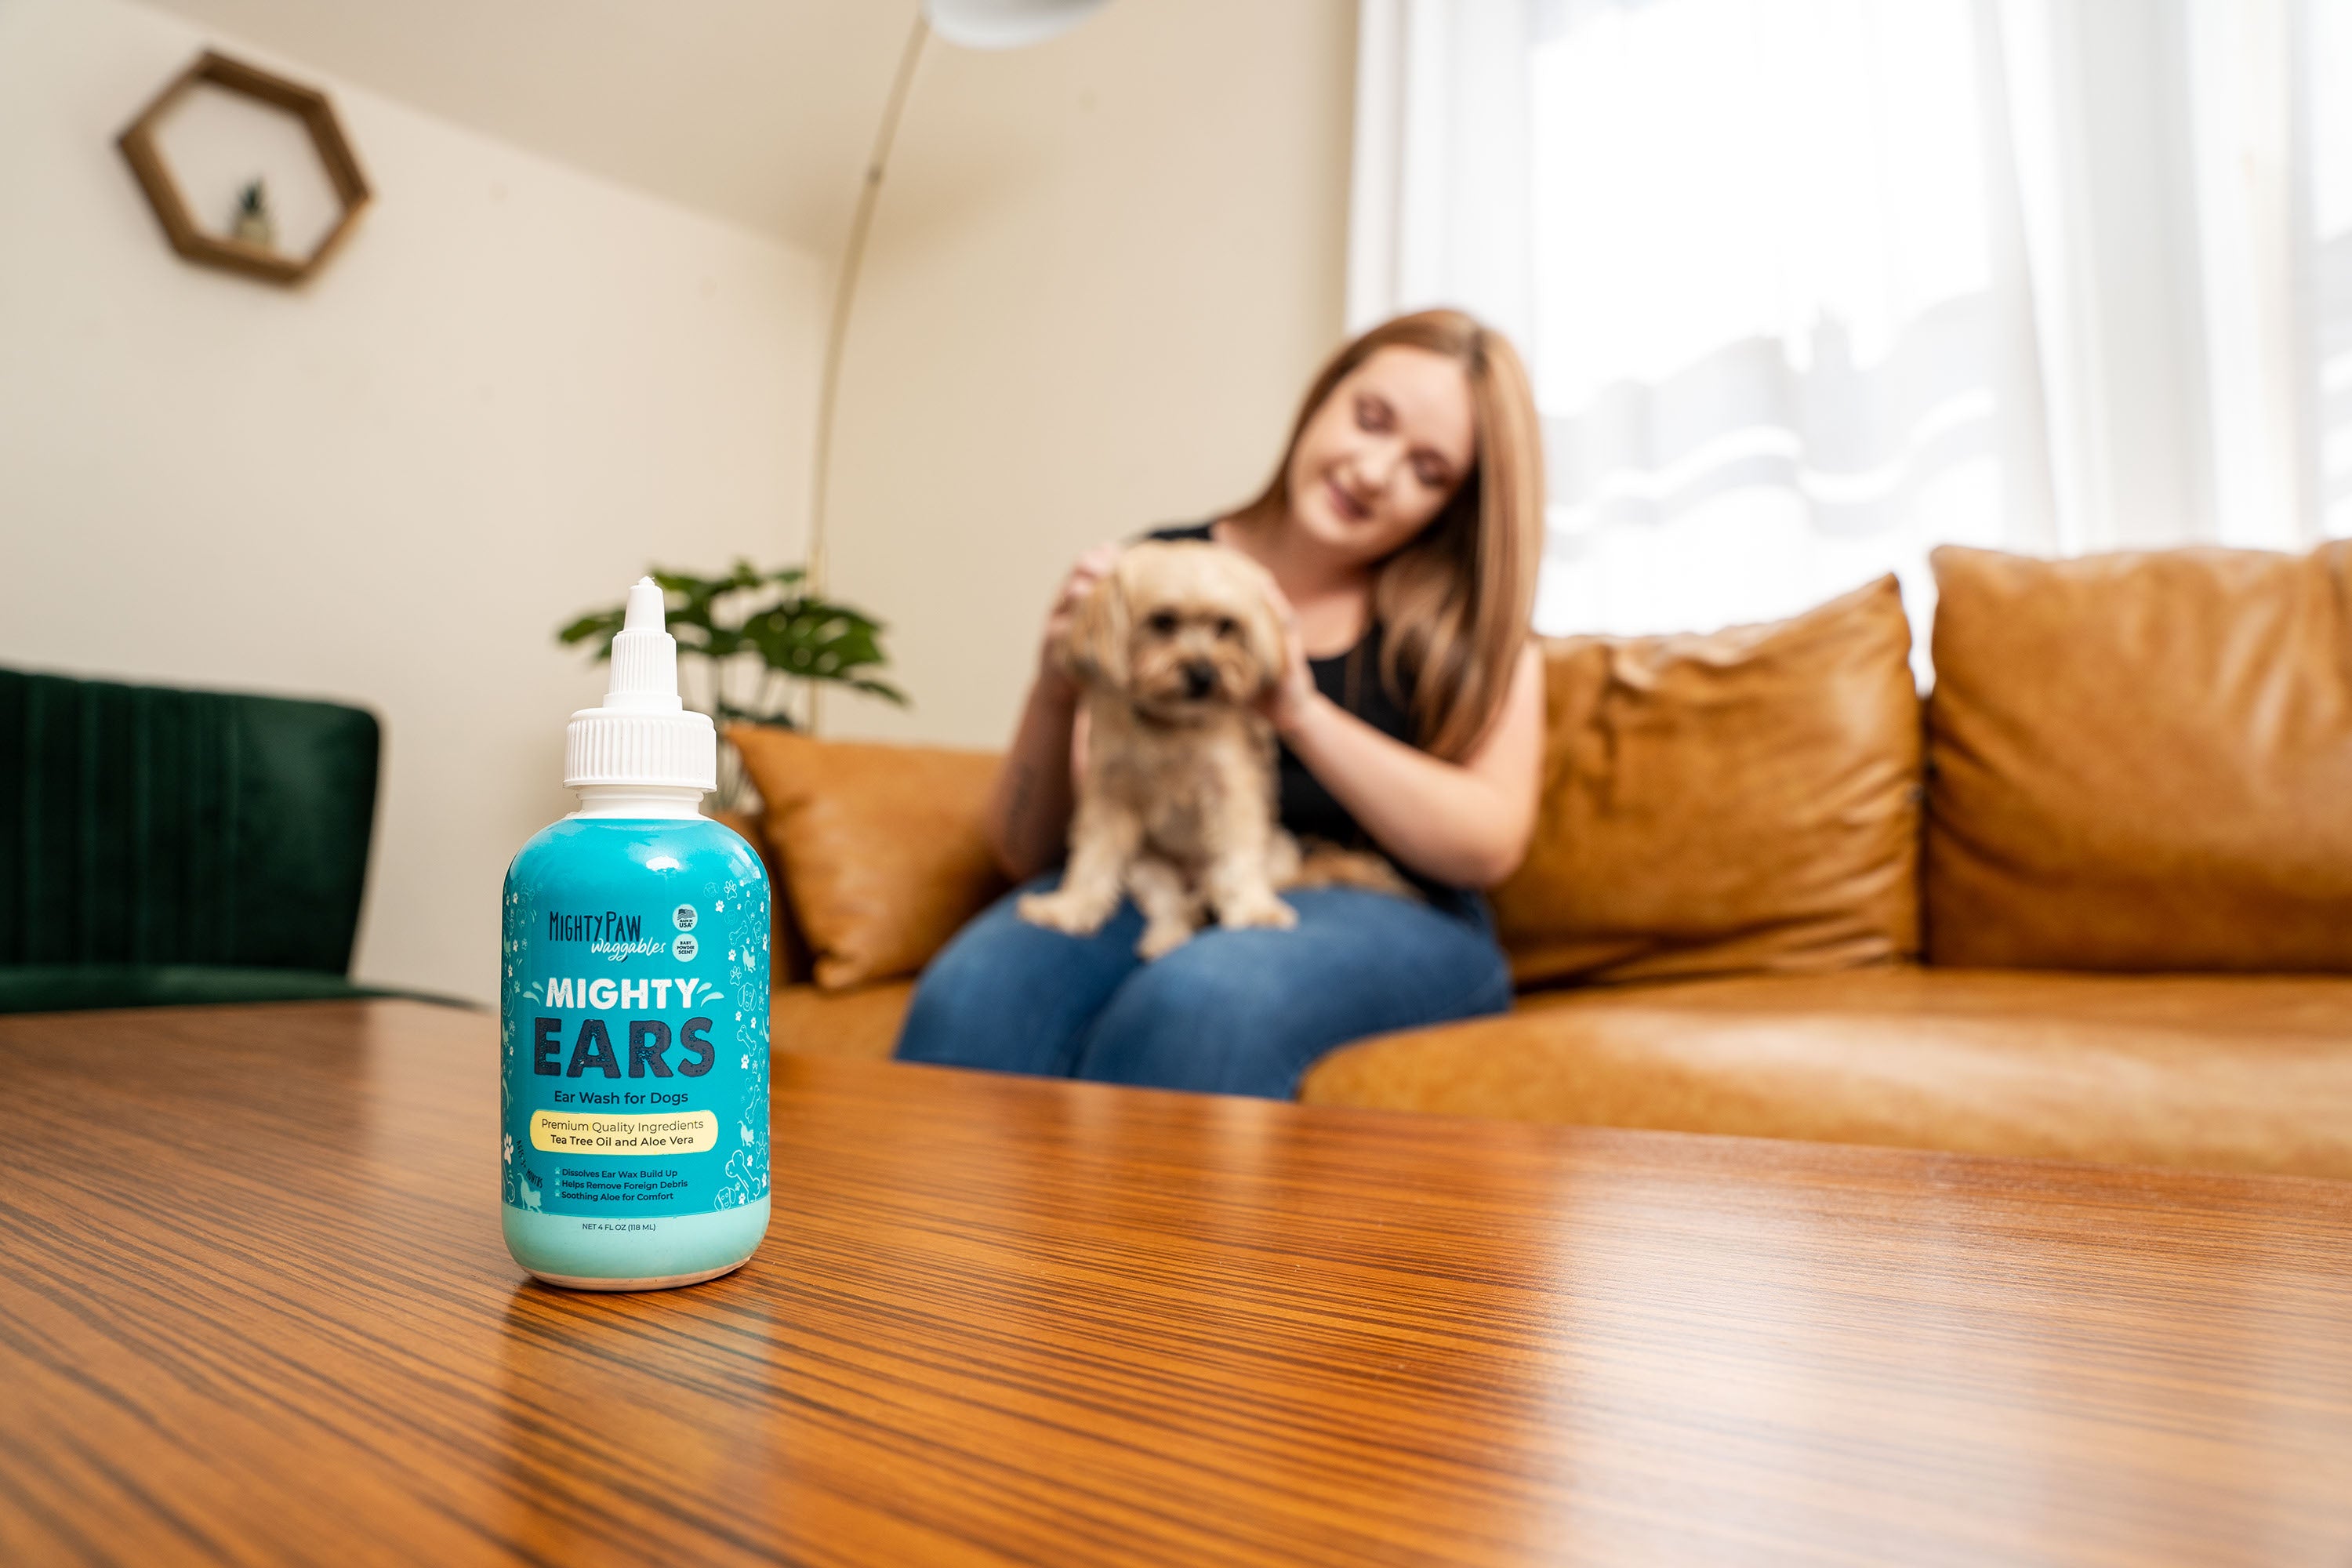 Woman sitting on couch petting her small tan dog with Mighty Ears ear wash on table in front of them.